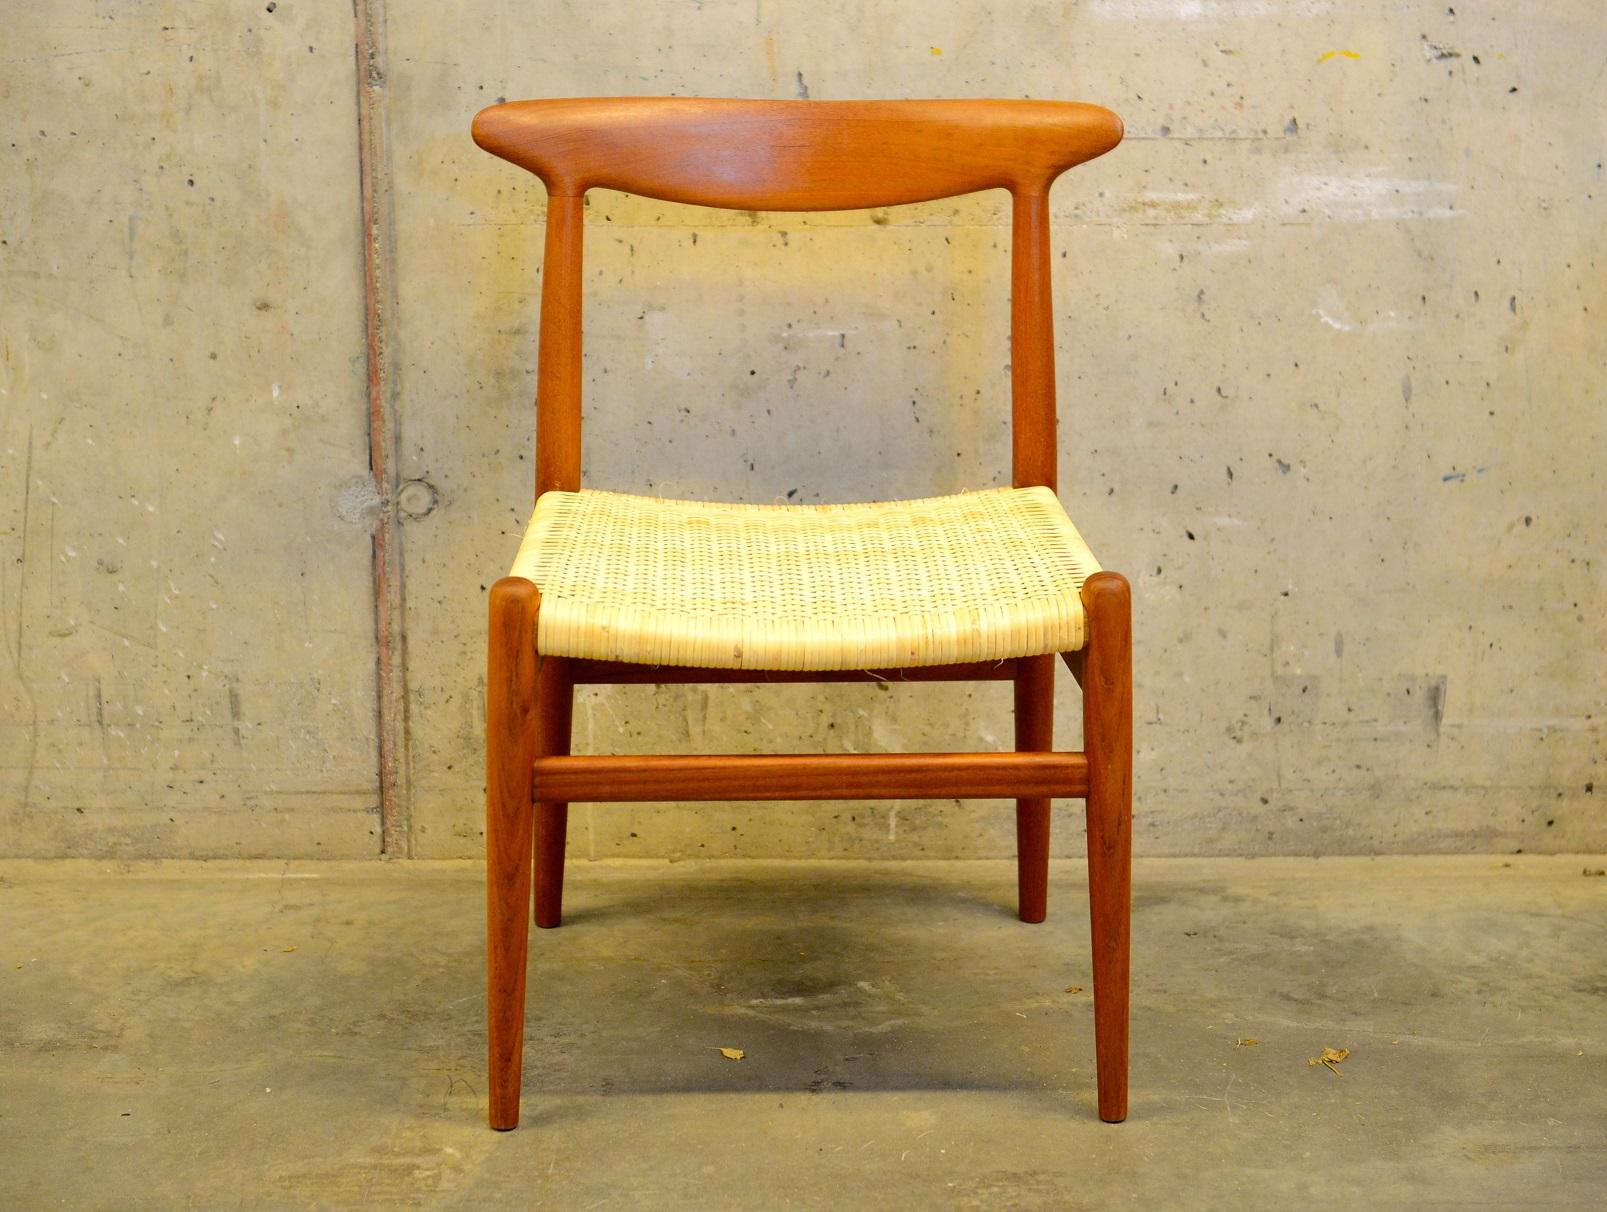 Danish Set of 4 W2 Teak and Cane Chairs by Hans J. Wegner, 1950s, C.M. Madsens DK For Sale